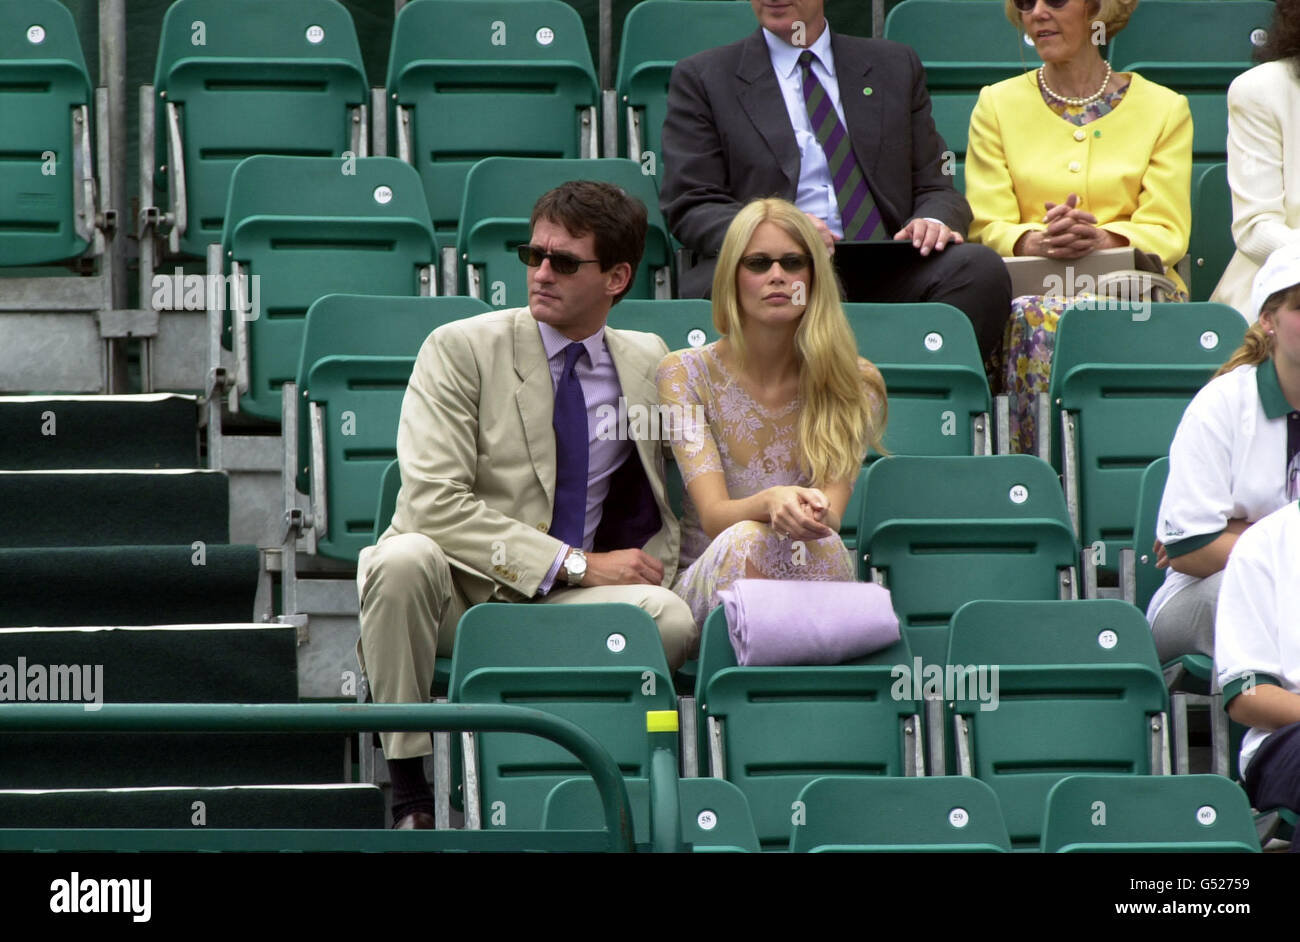 Model Claudia Schiffer and Fiance Tim Jeffries watching the tennis during the Duke of York's NSPCC Tennis Challenge at Buckingham Palace. Stock Photo